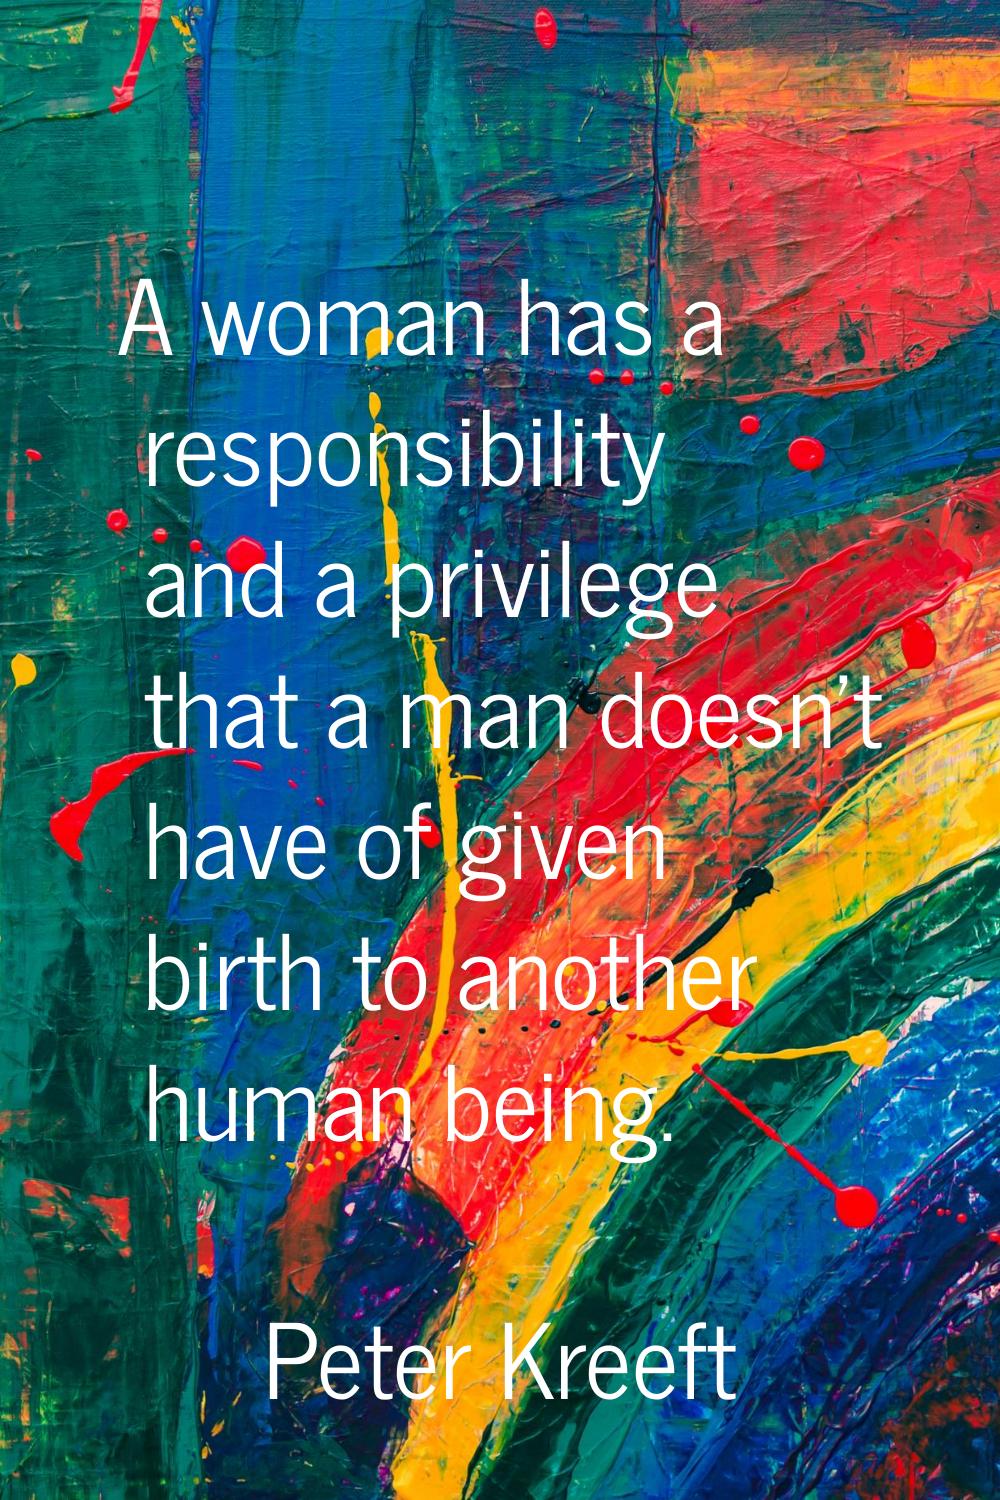 A woman has a responsibility and a privilege that a man doesn't have of given birth to another huma